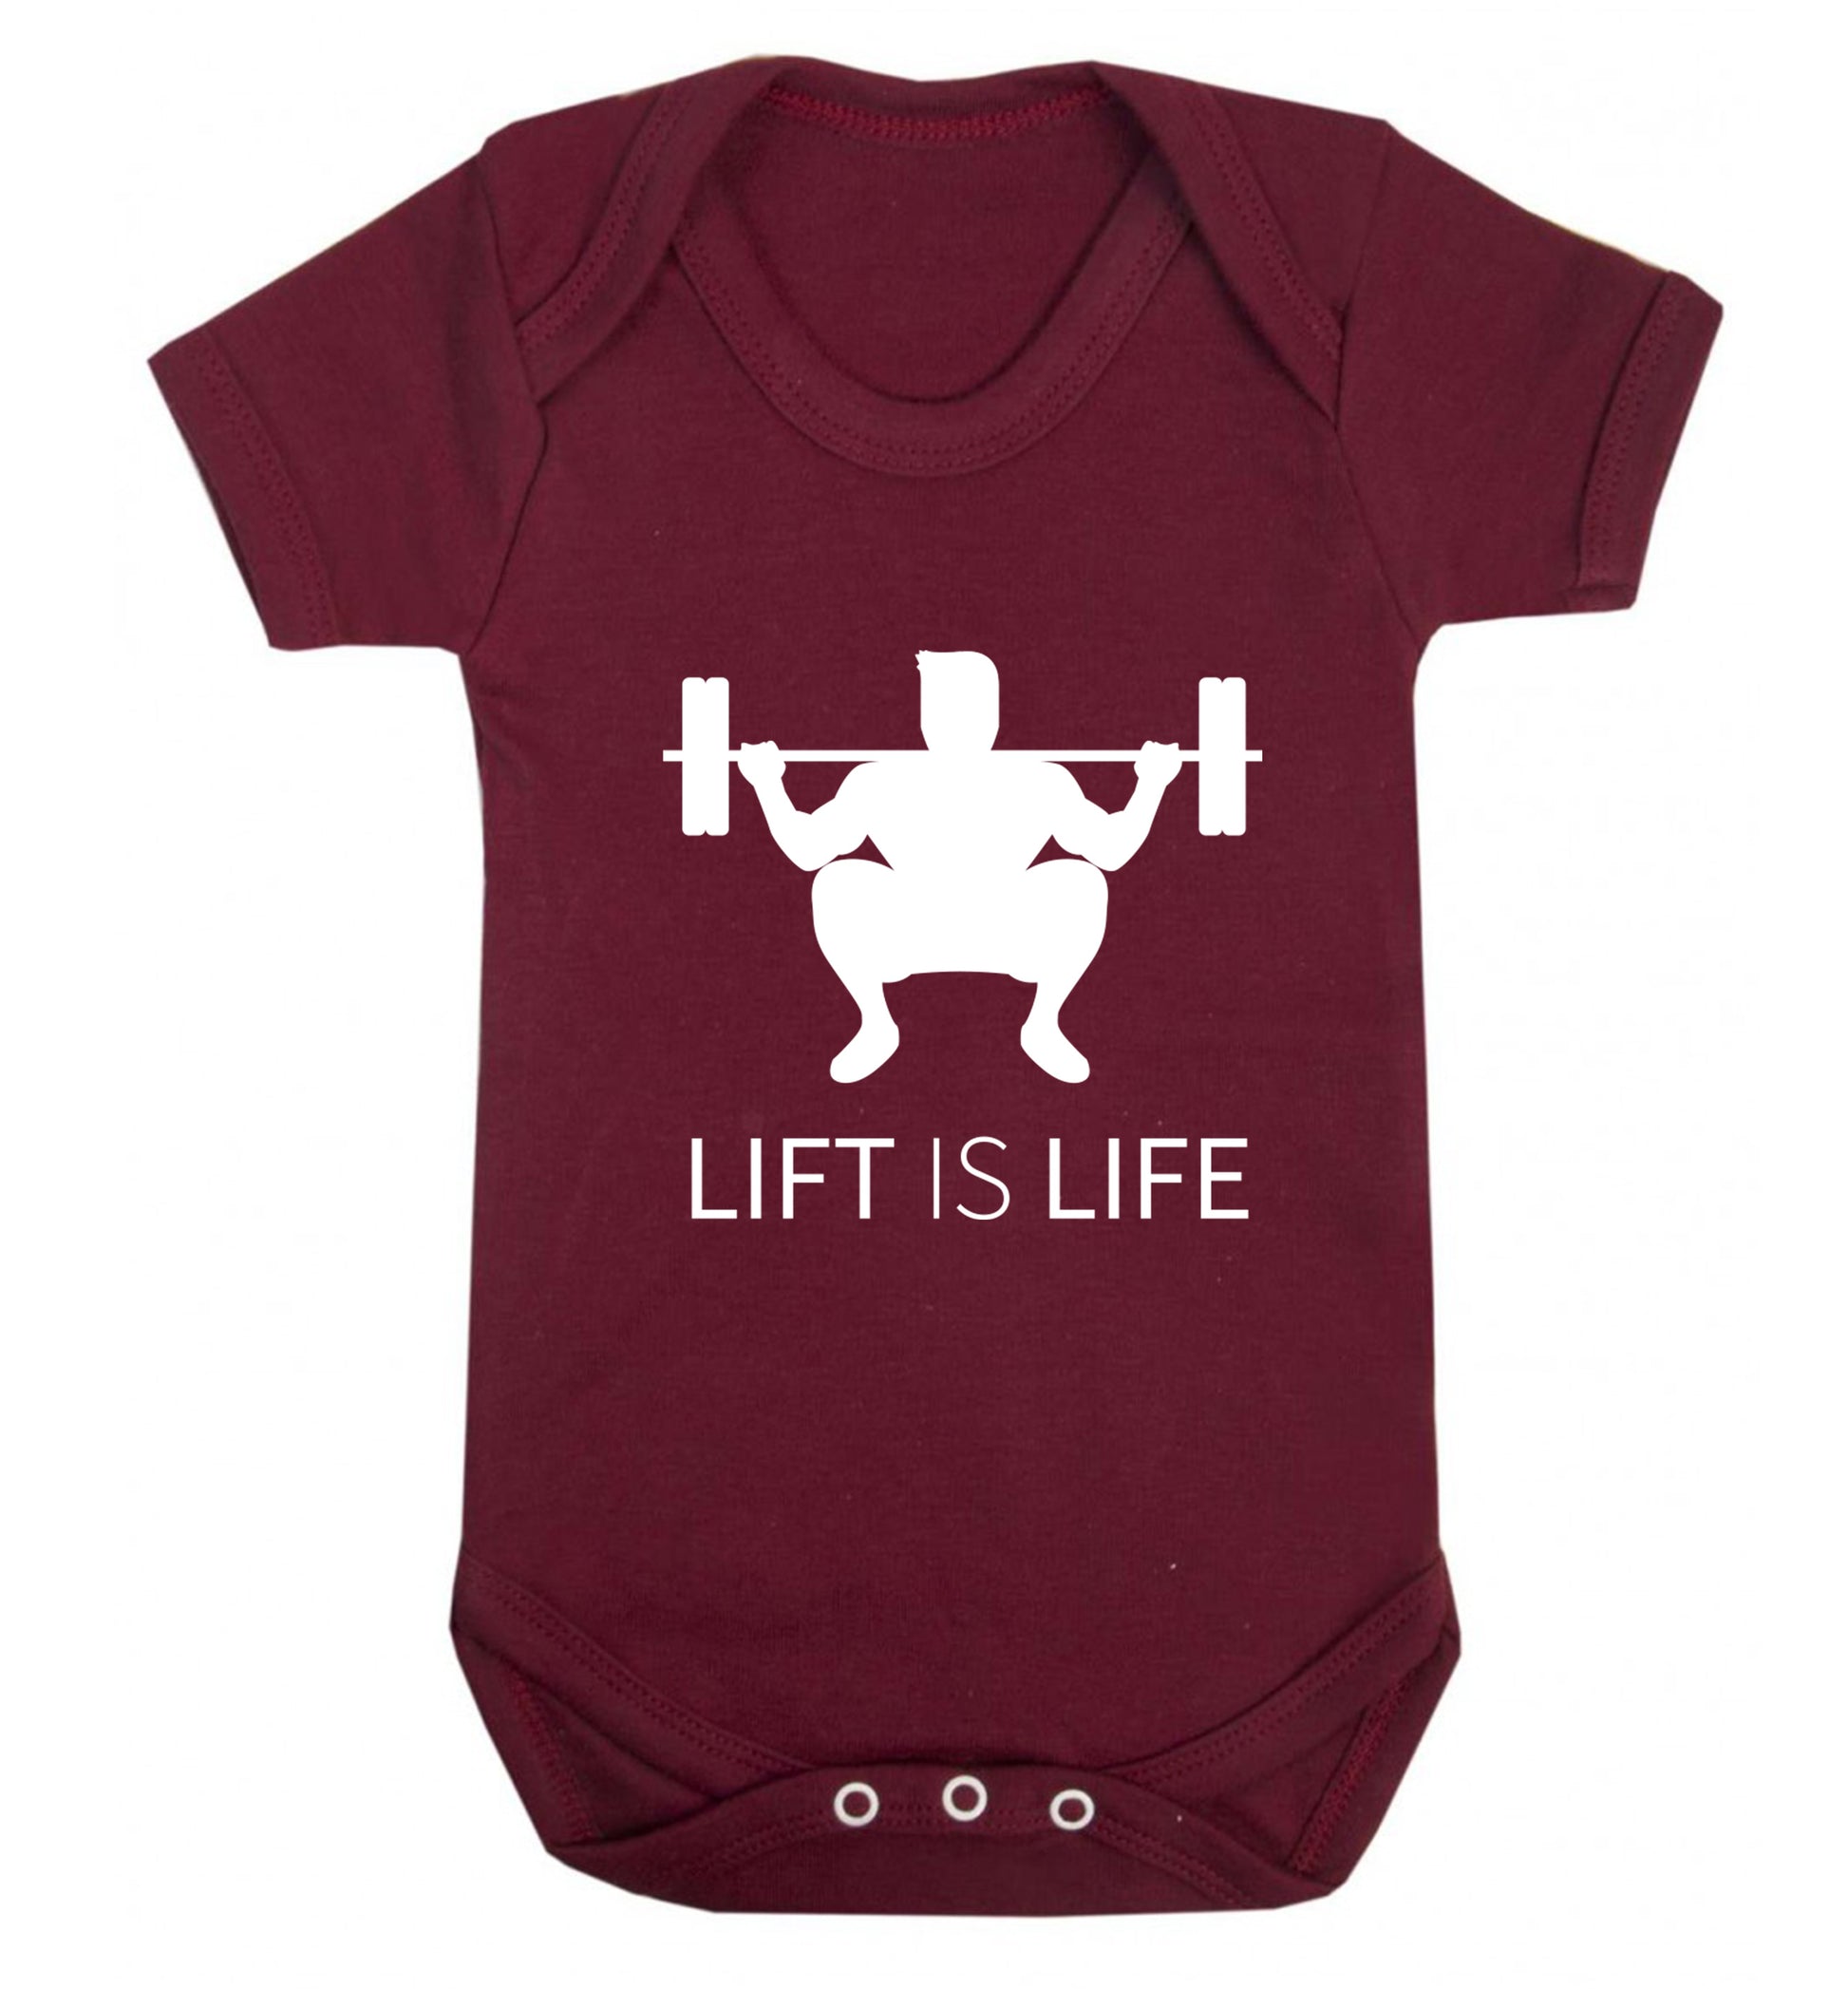 Lift is life Baby Vest maroon 18-24 months